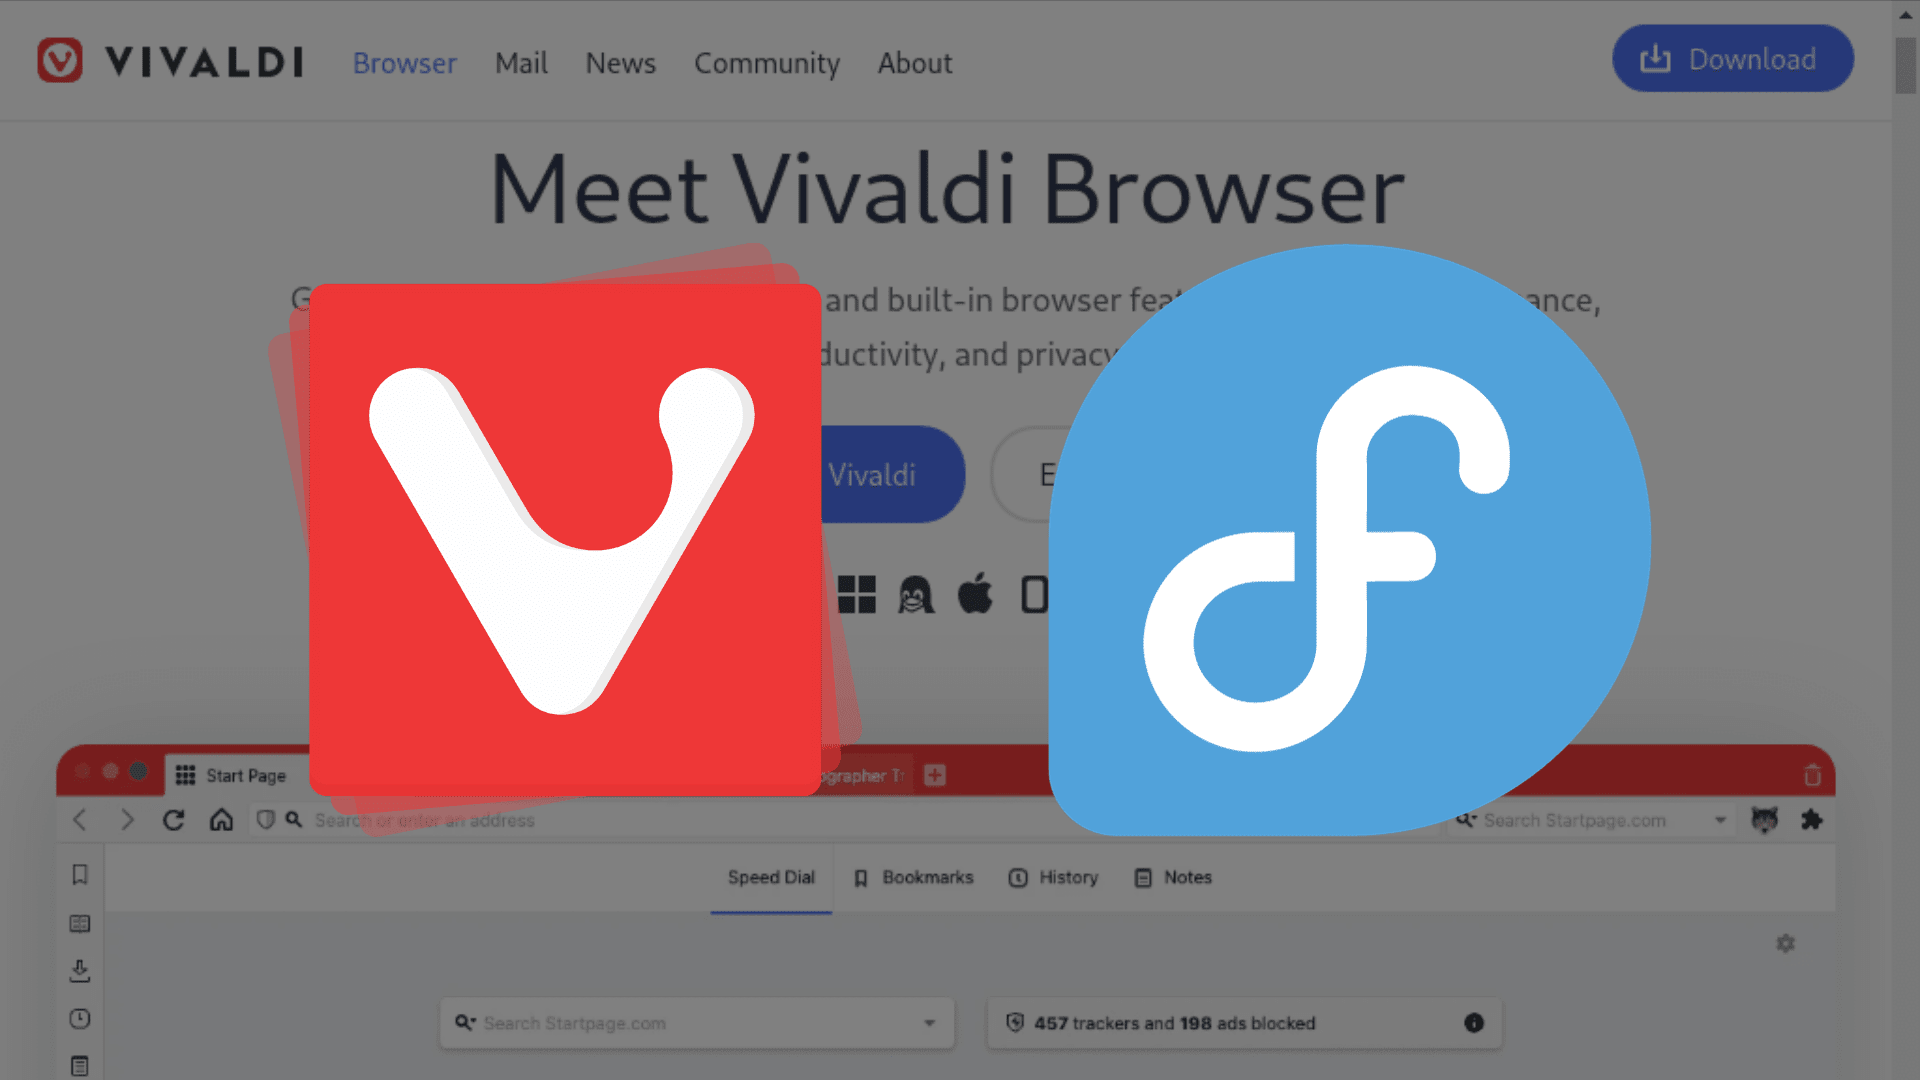 Step-by-step guide to installing Vivaldi Browser on Fedora Linux